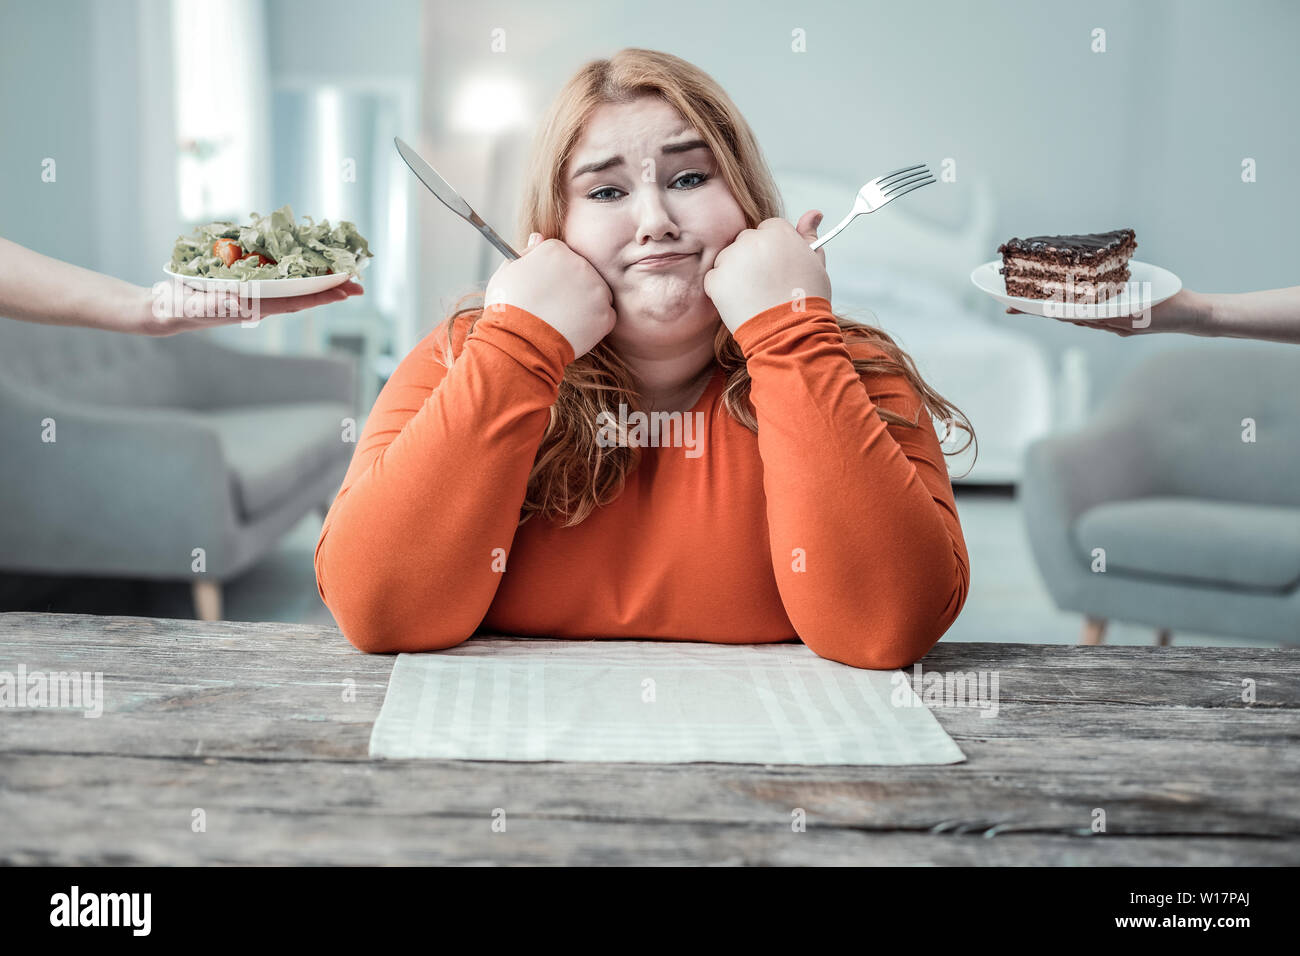 Bored overweight female person waiting for dinner Stock Photo